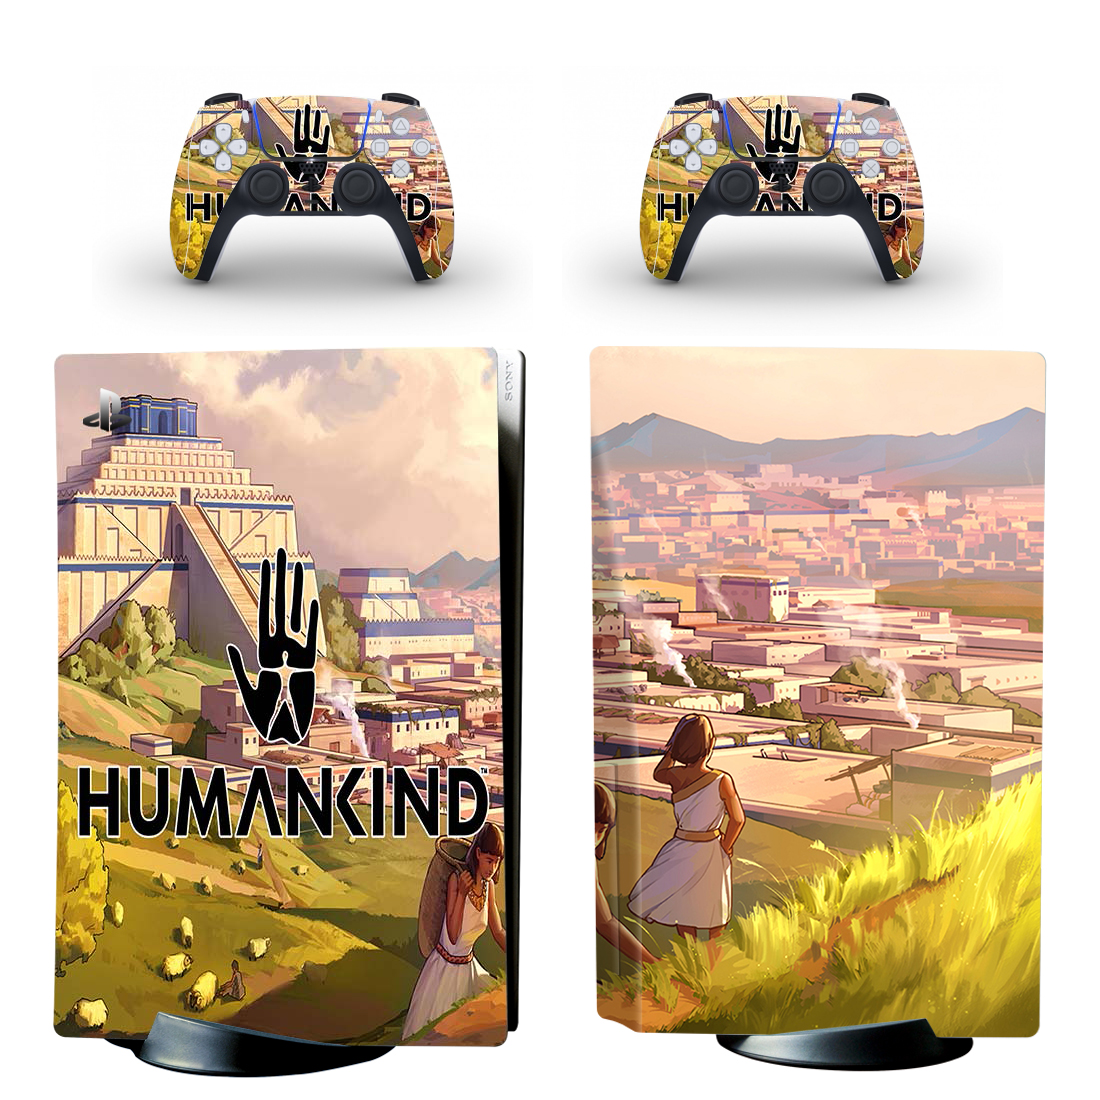 humankind ps5 download free